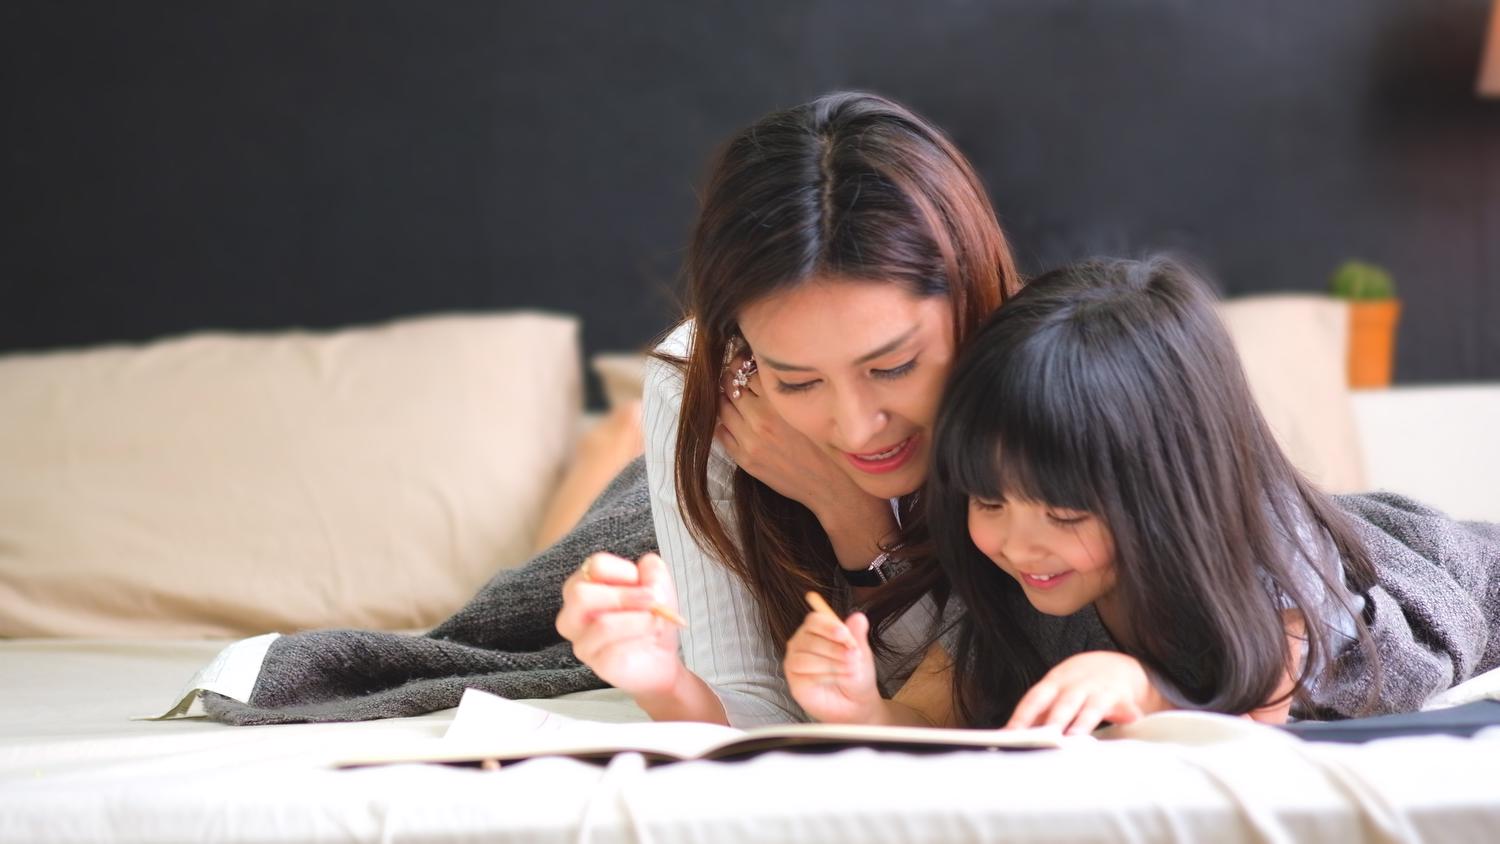 Mom and daughter snuggled together with book and pencil